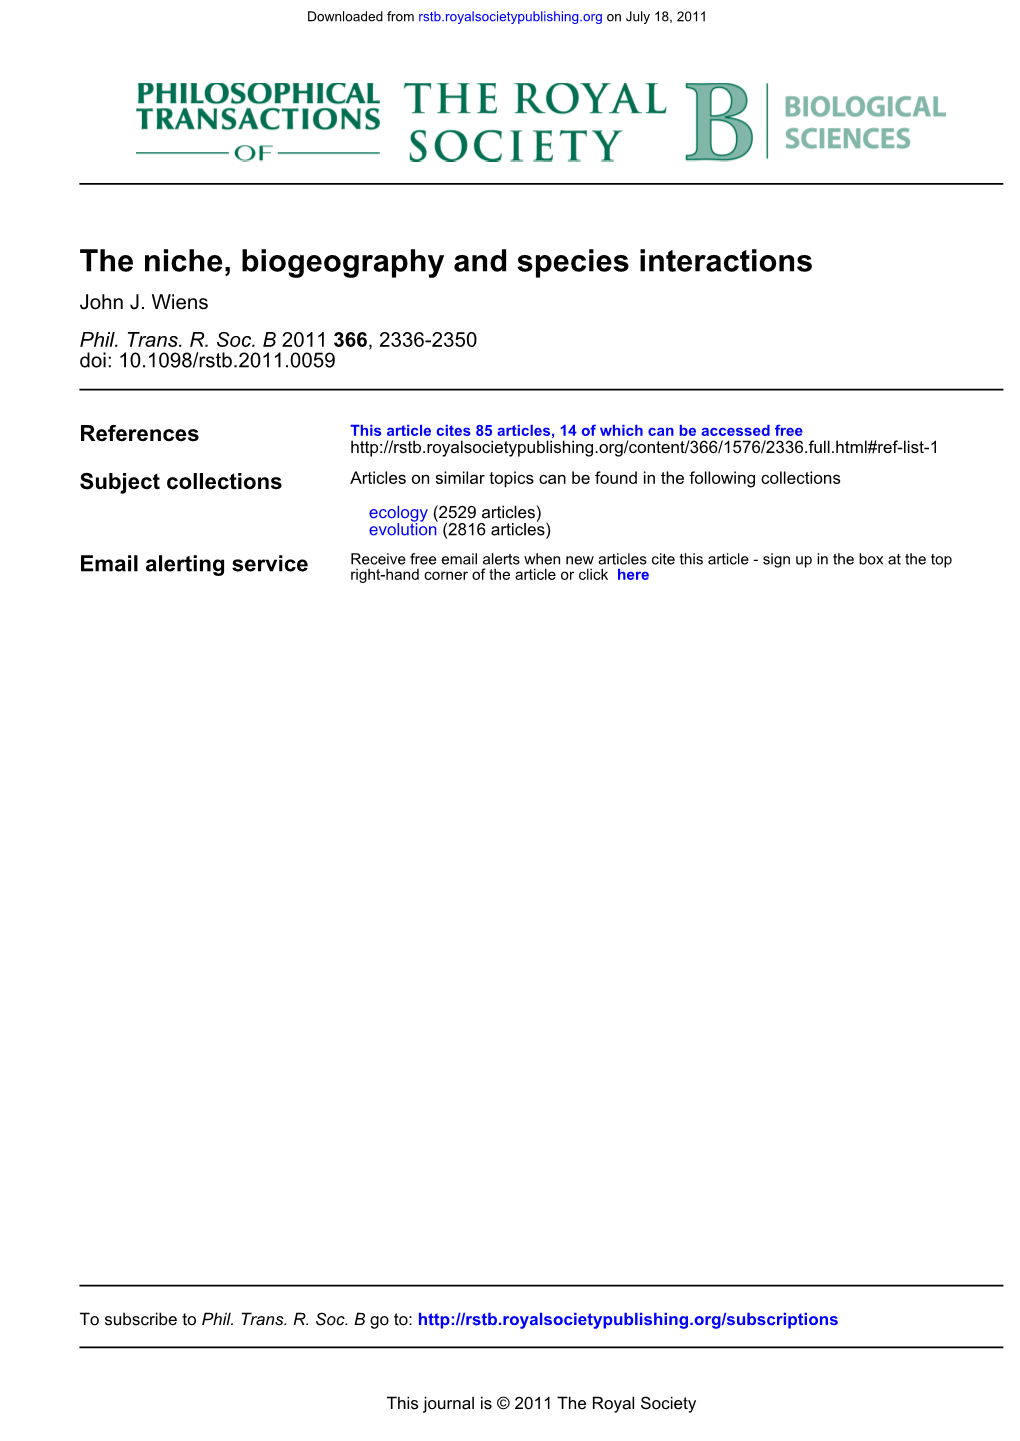 The Niche, Biogeography and Species Interactions